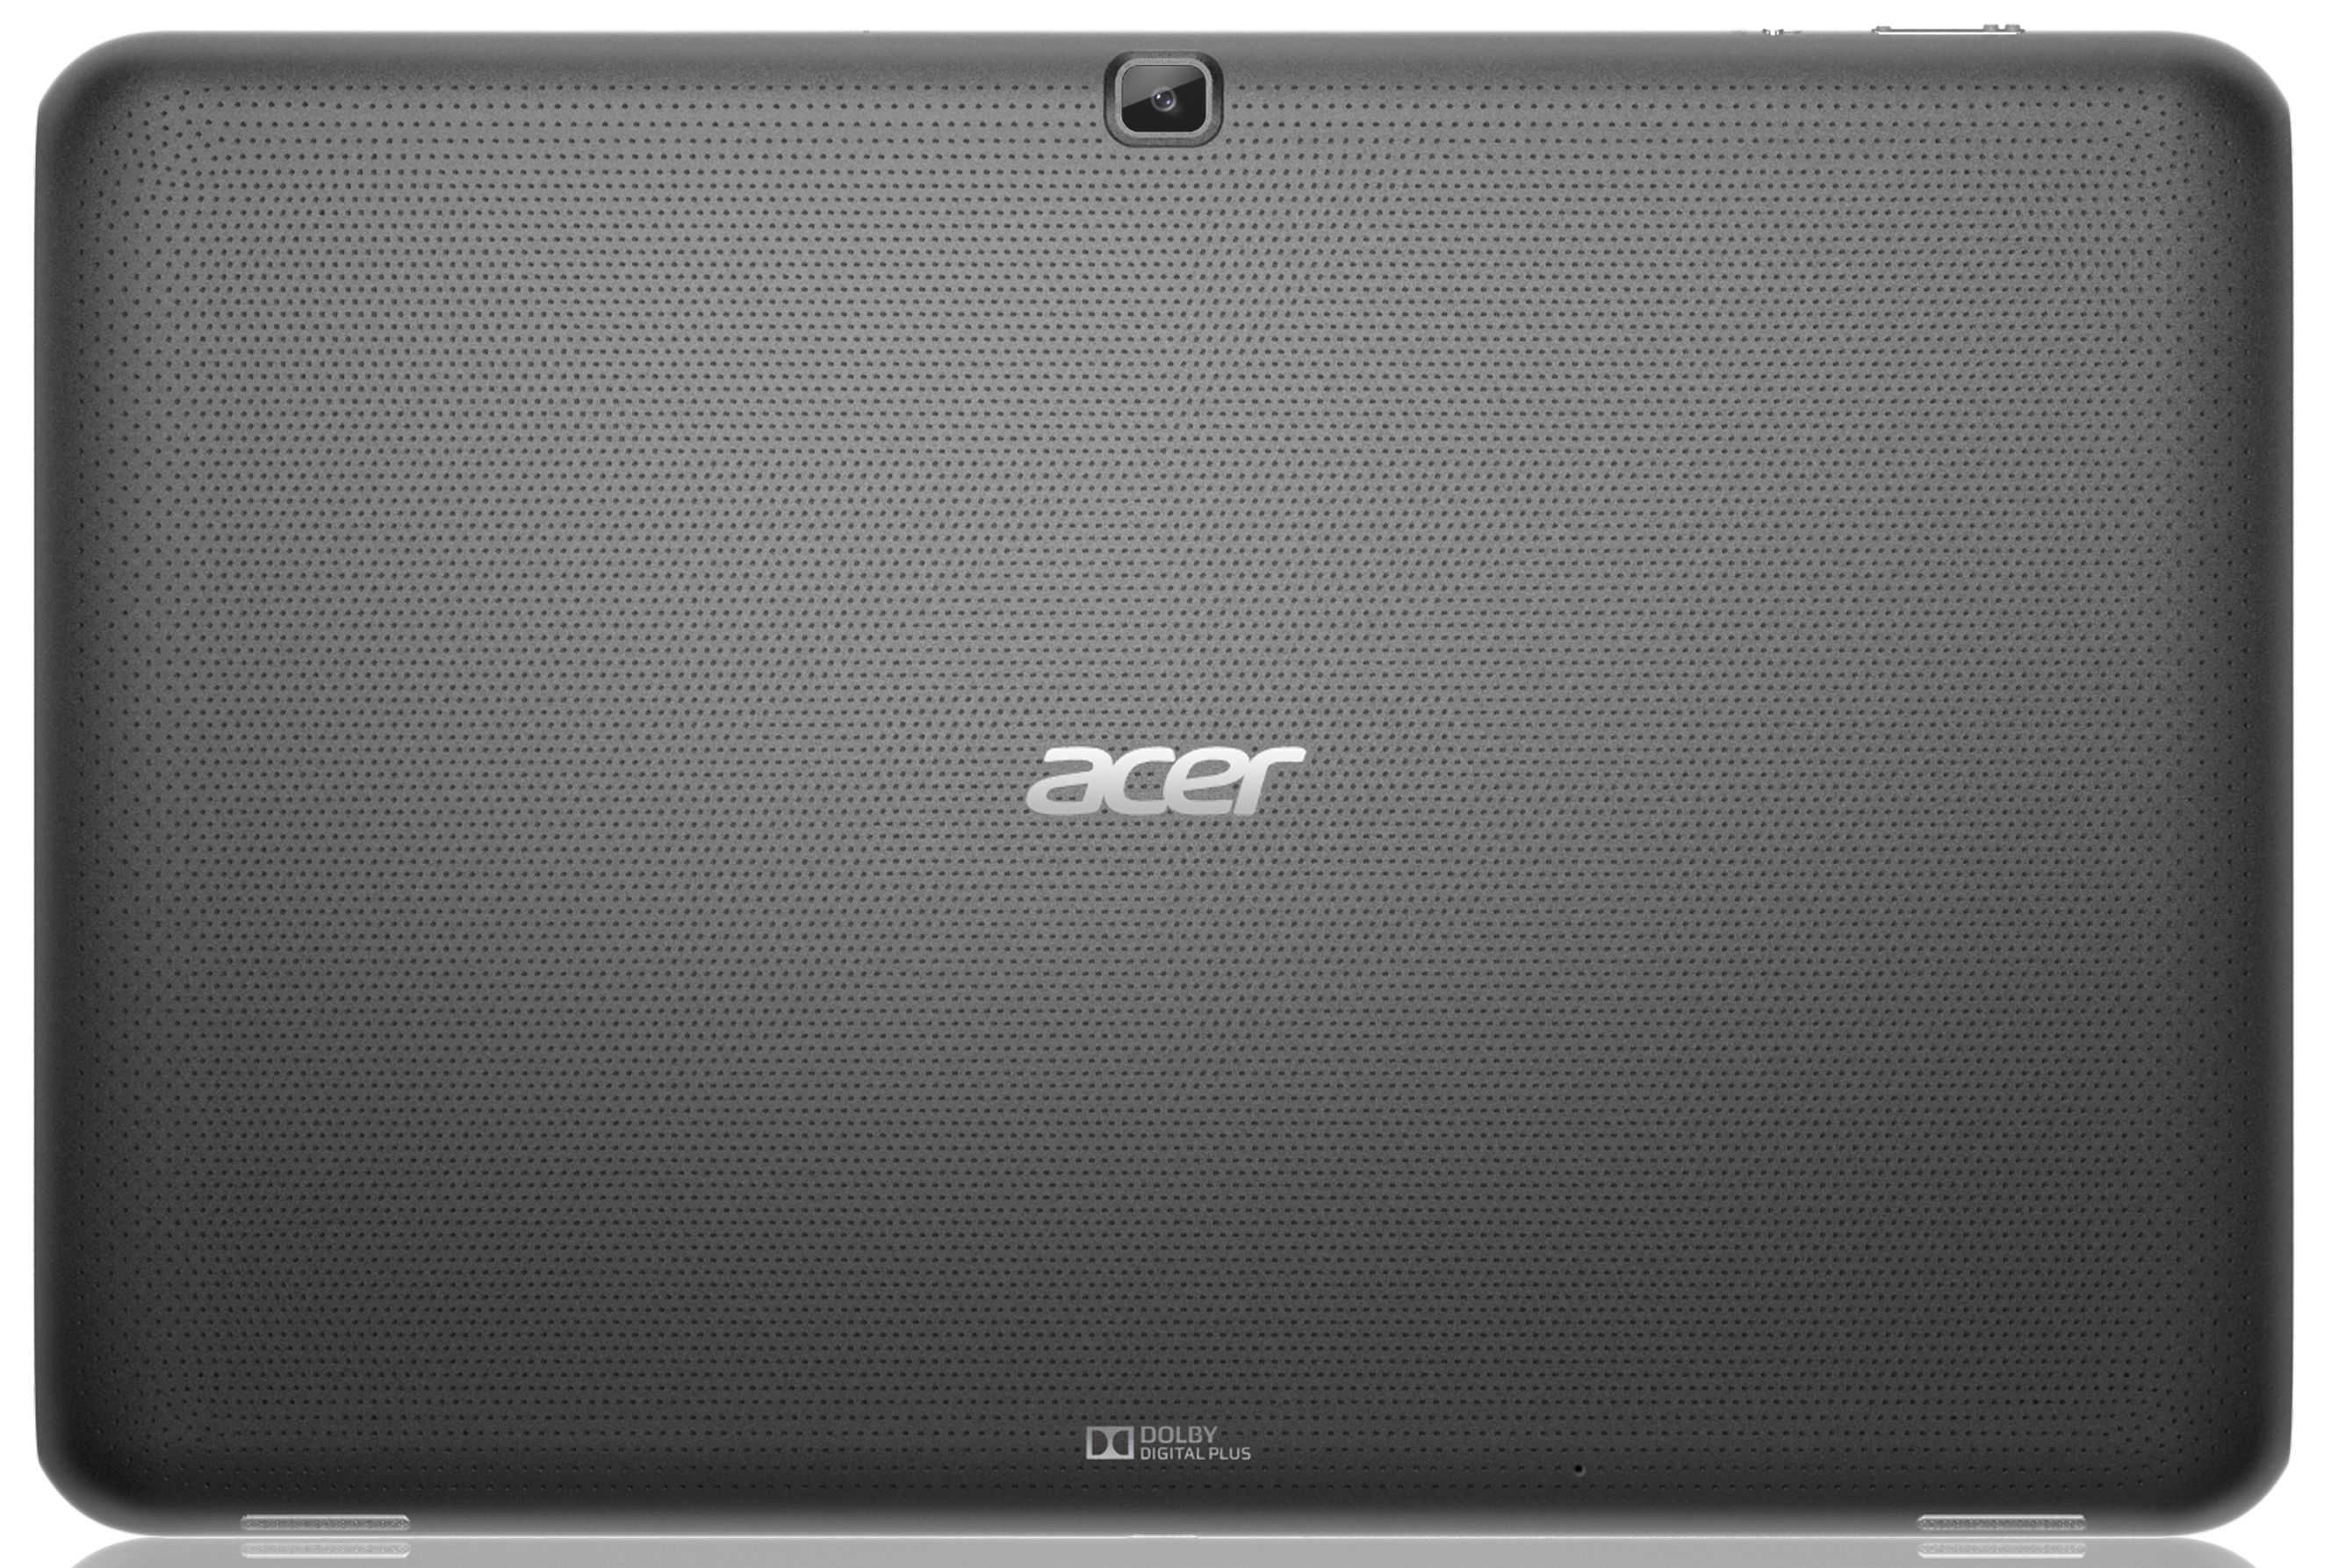 Acer iconia tab a701 32gb black (tegra 3 t30s 1.3 ghz, 1024mb, 32gb, 3g, wi-fi, bluetooth, 10, 1900x1020, android 4.0)